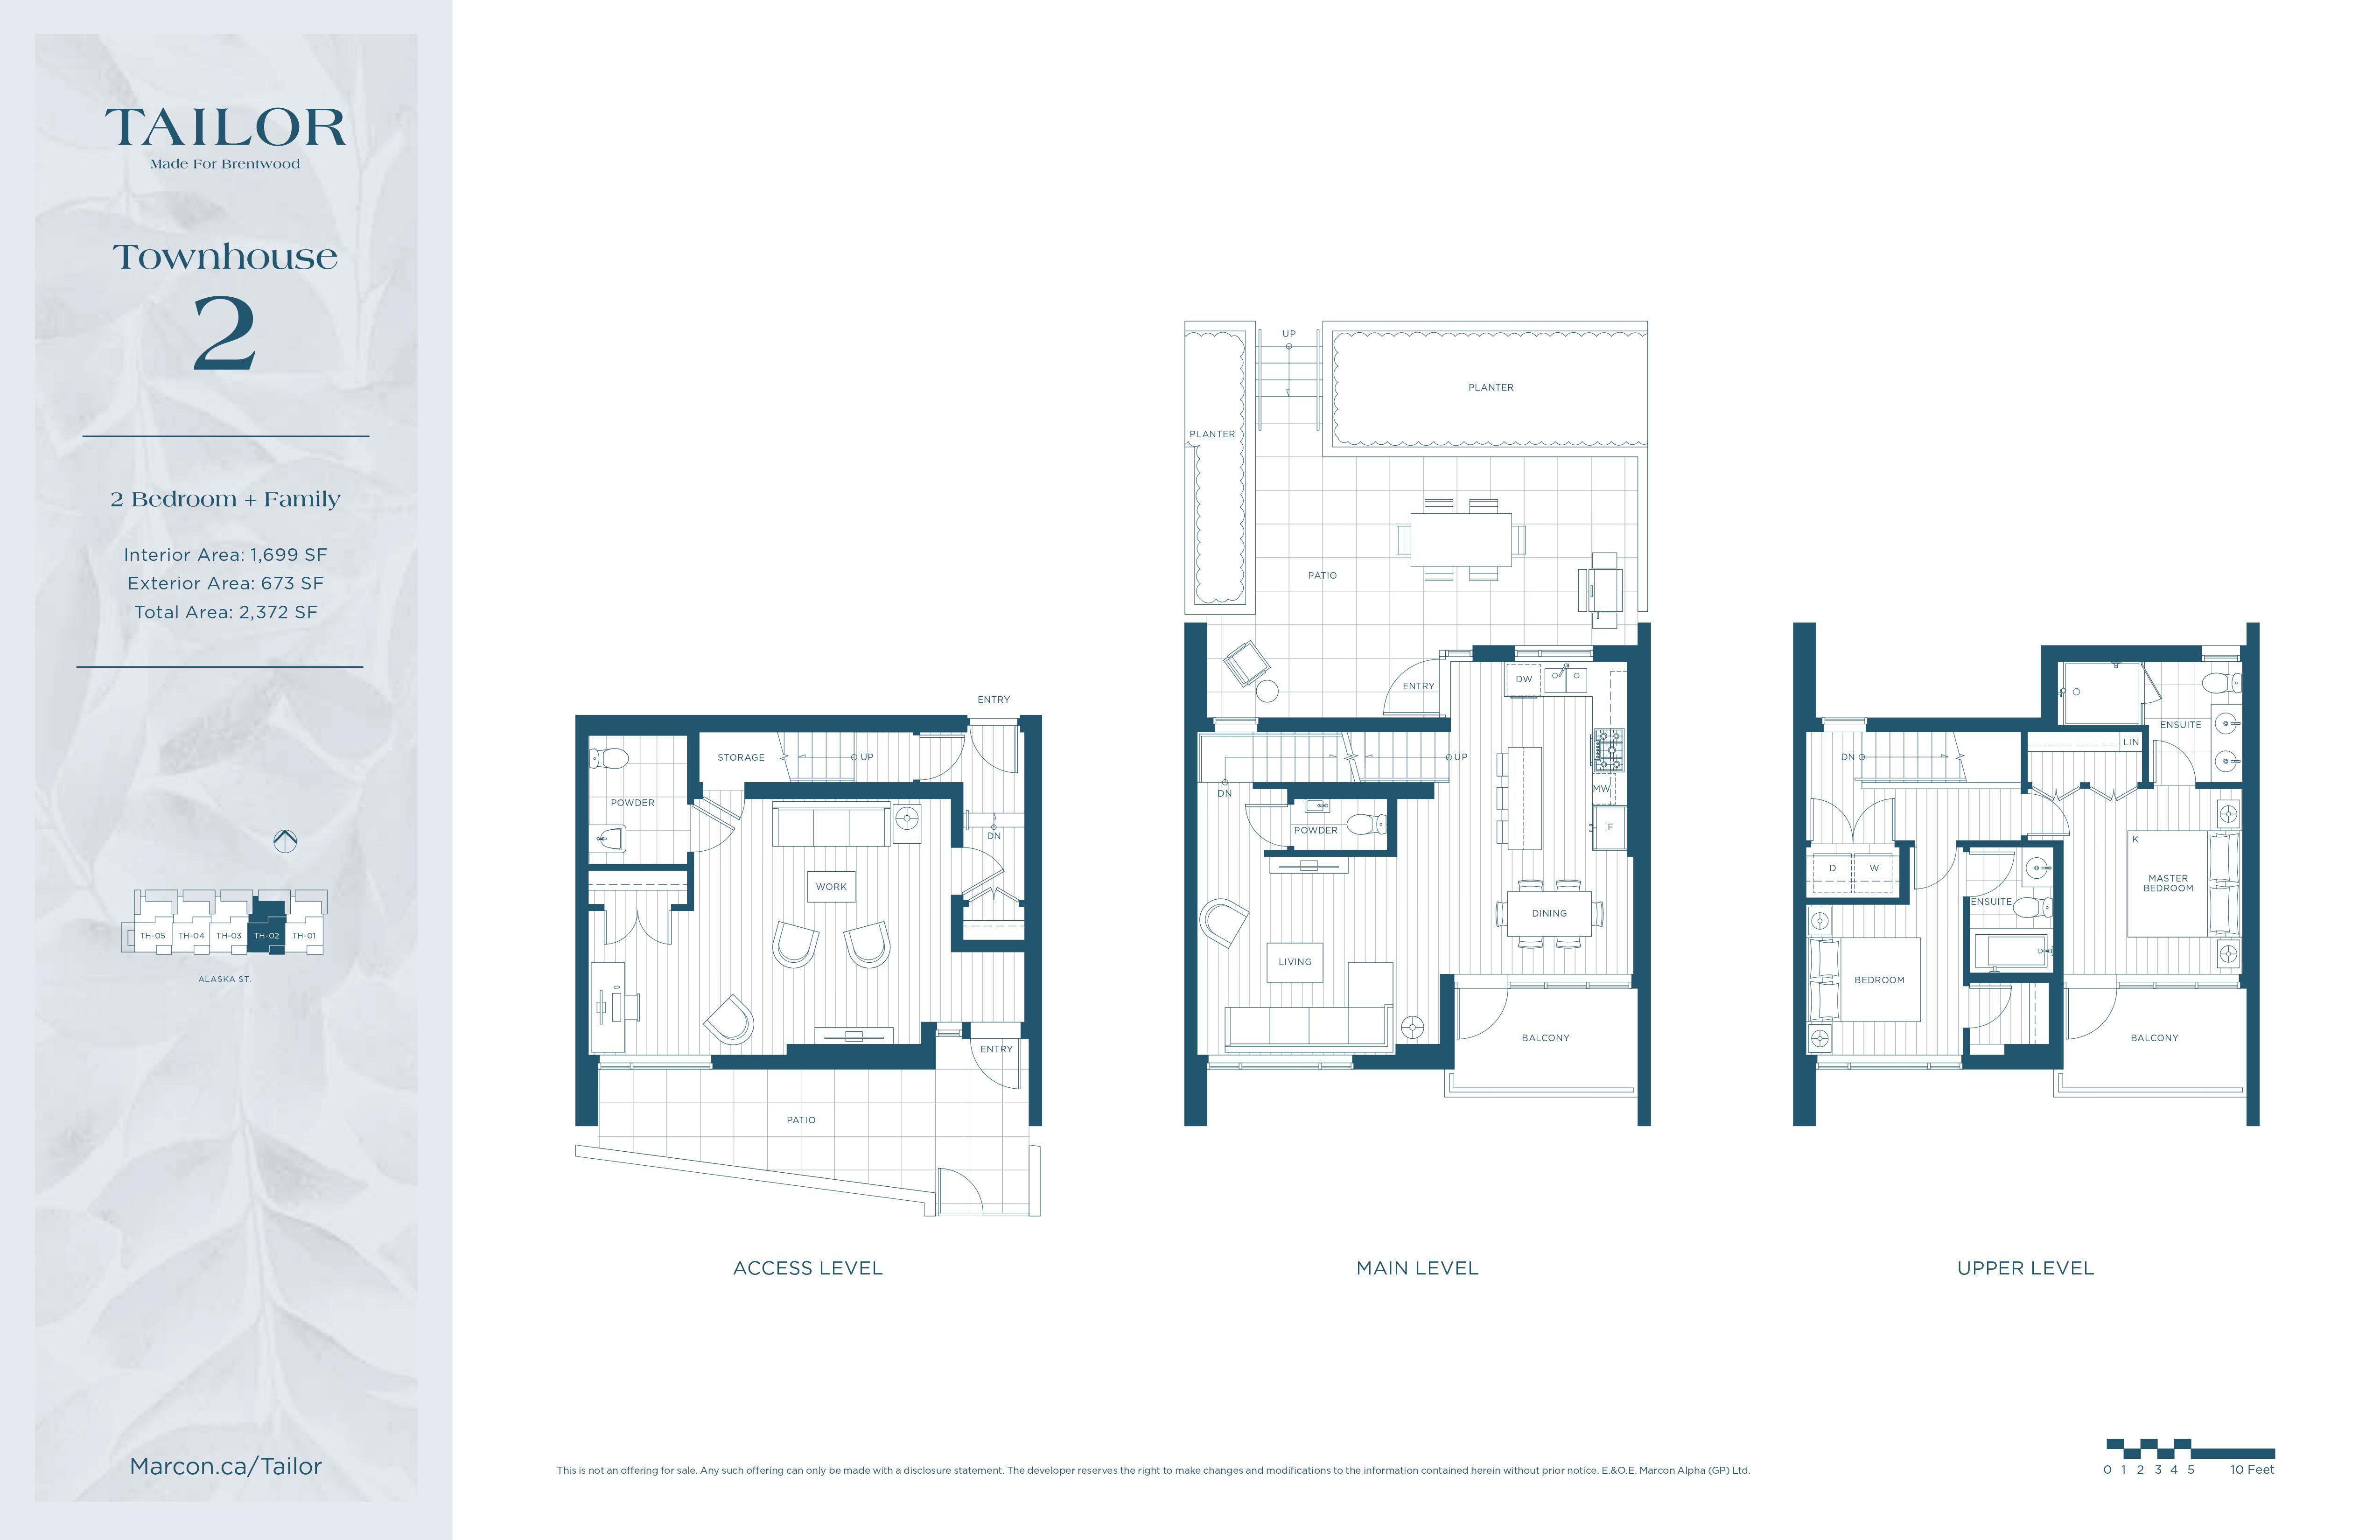  Townhouse 2  Floor Plan of Tailor Condos with undefined beds